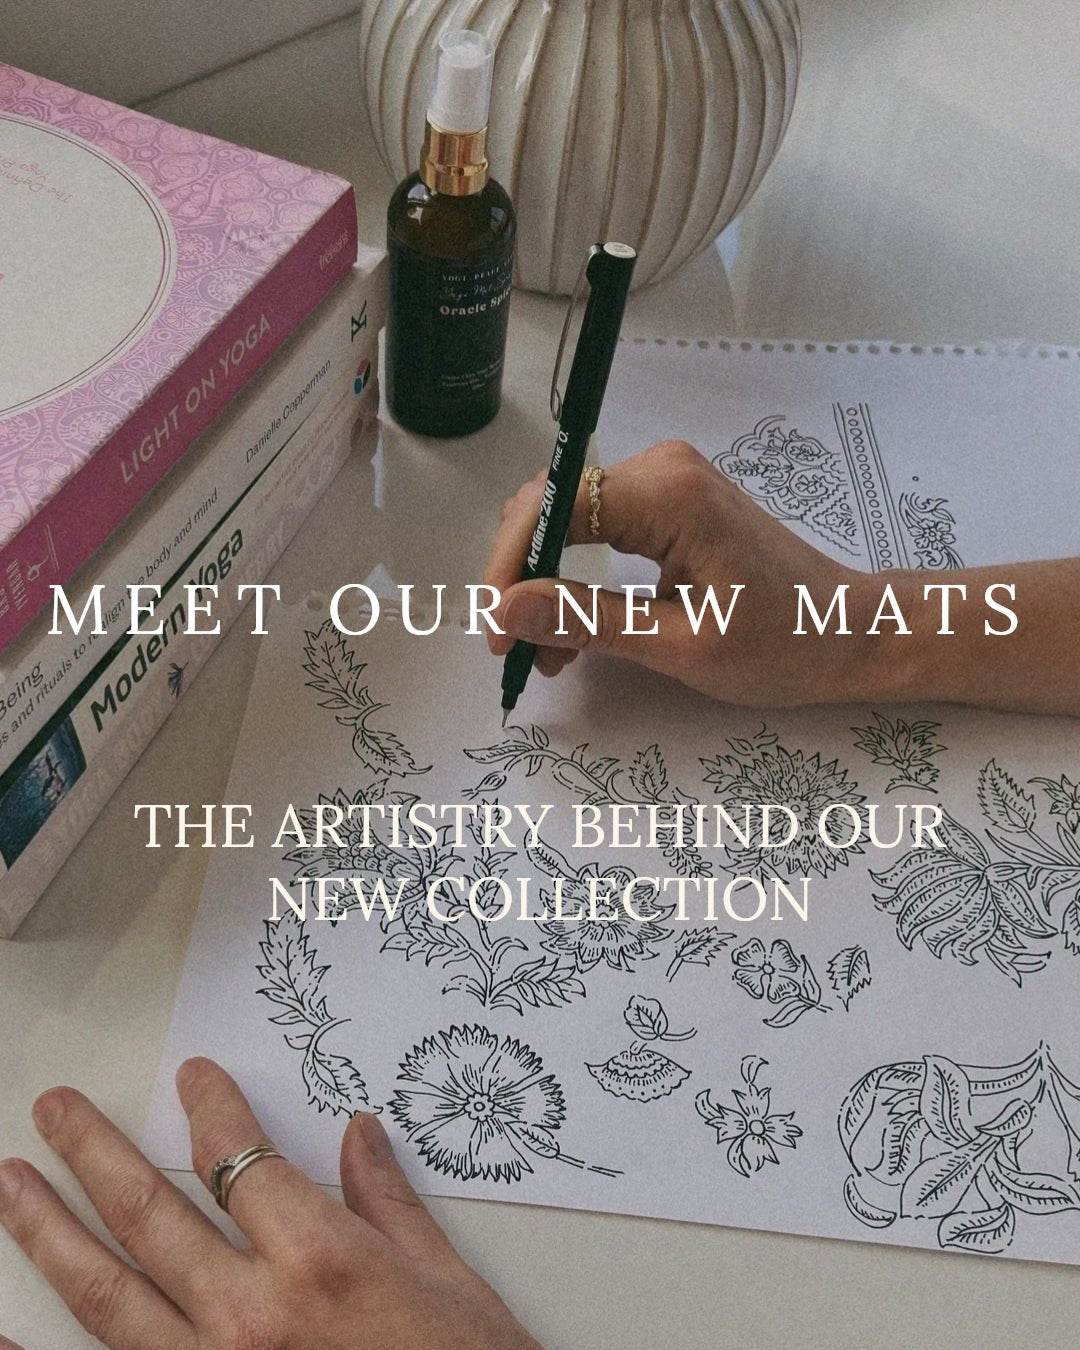 The Artistry Behind Behind our New Collection - Yogi Peace Club